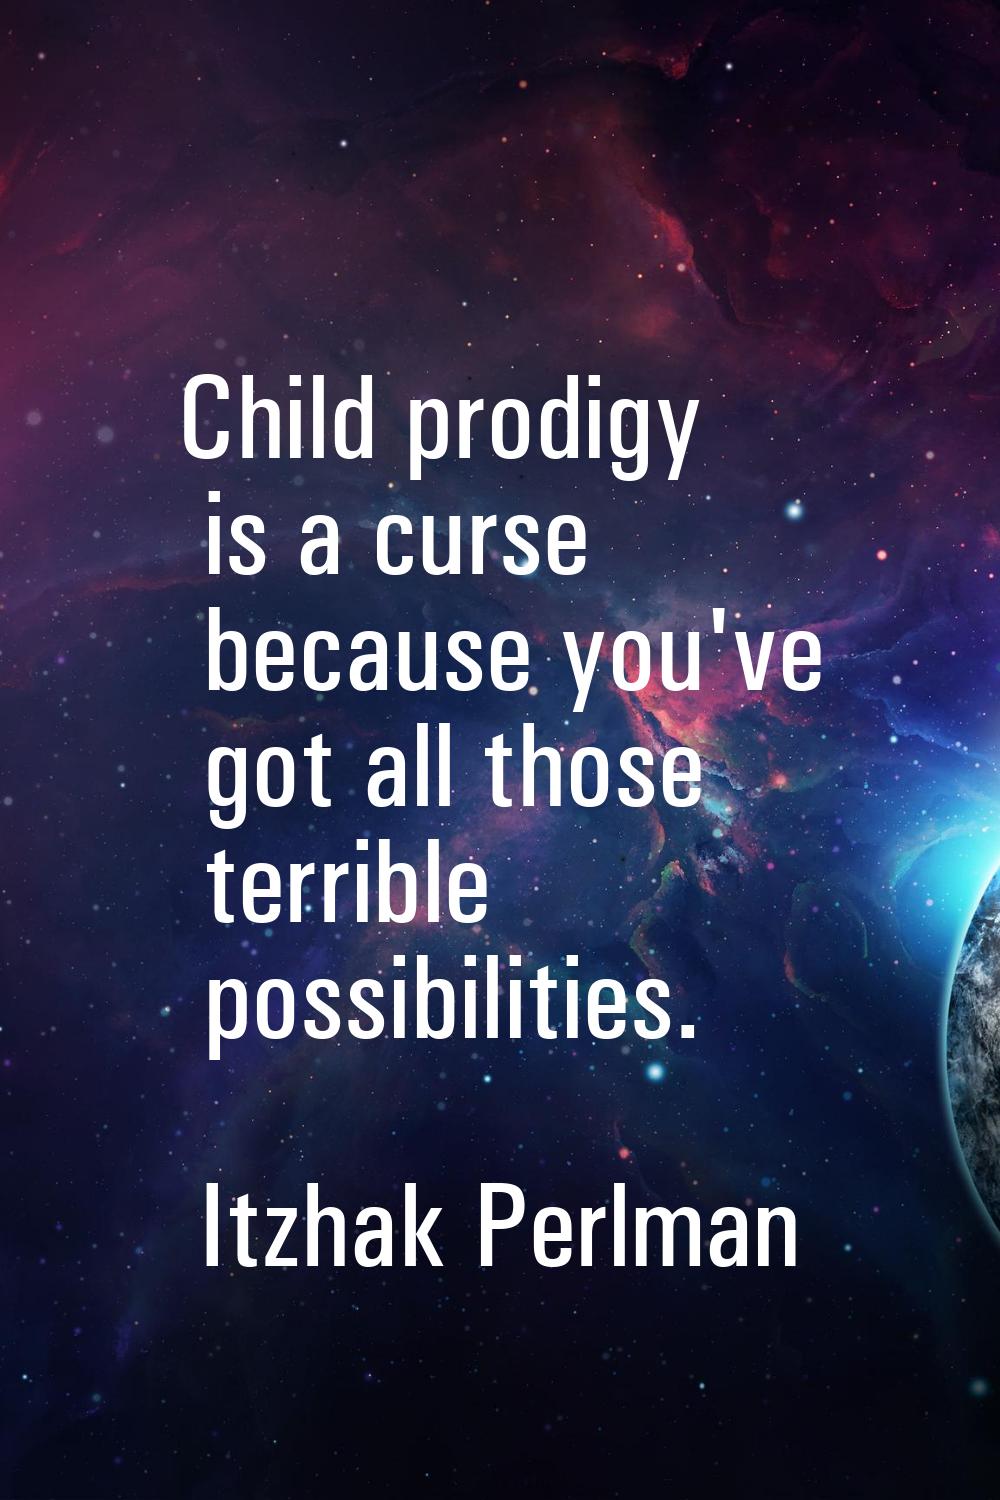 Child prodigy is a curse because you've got all those terrible possibilities.